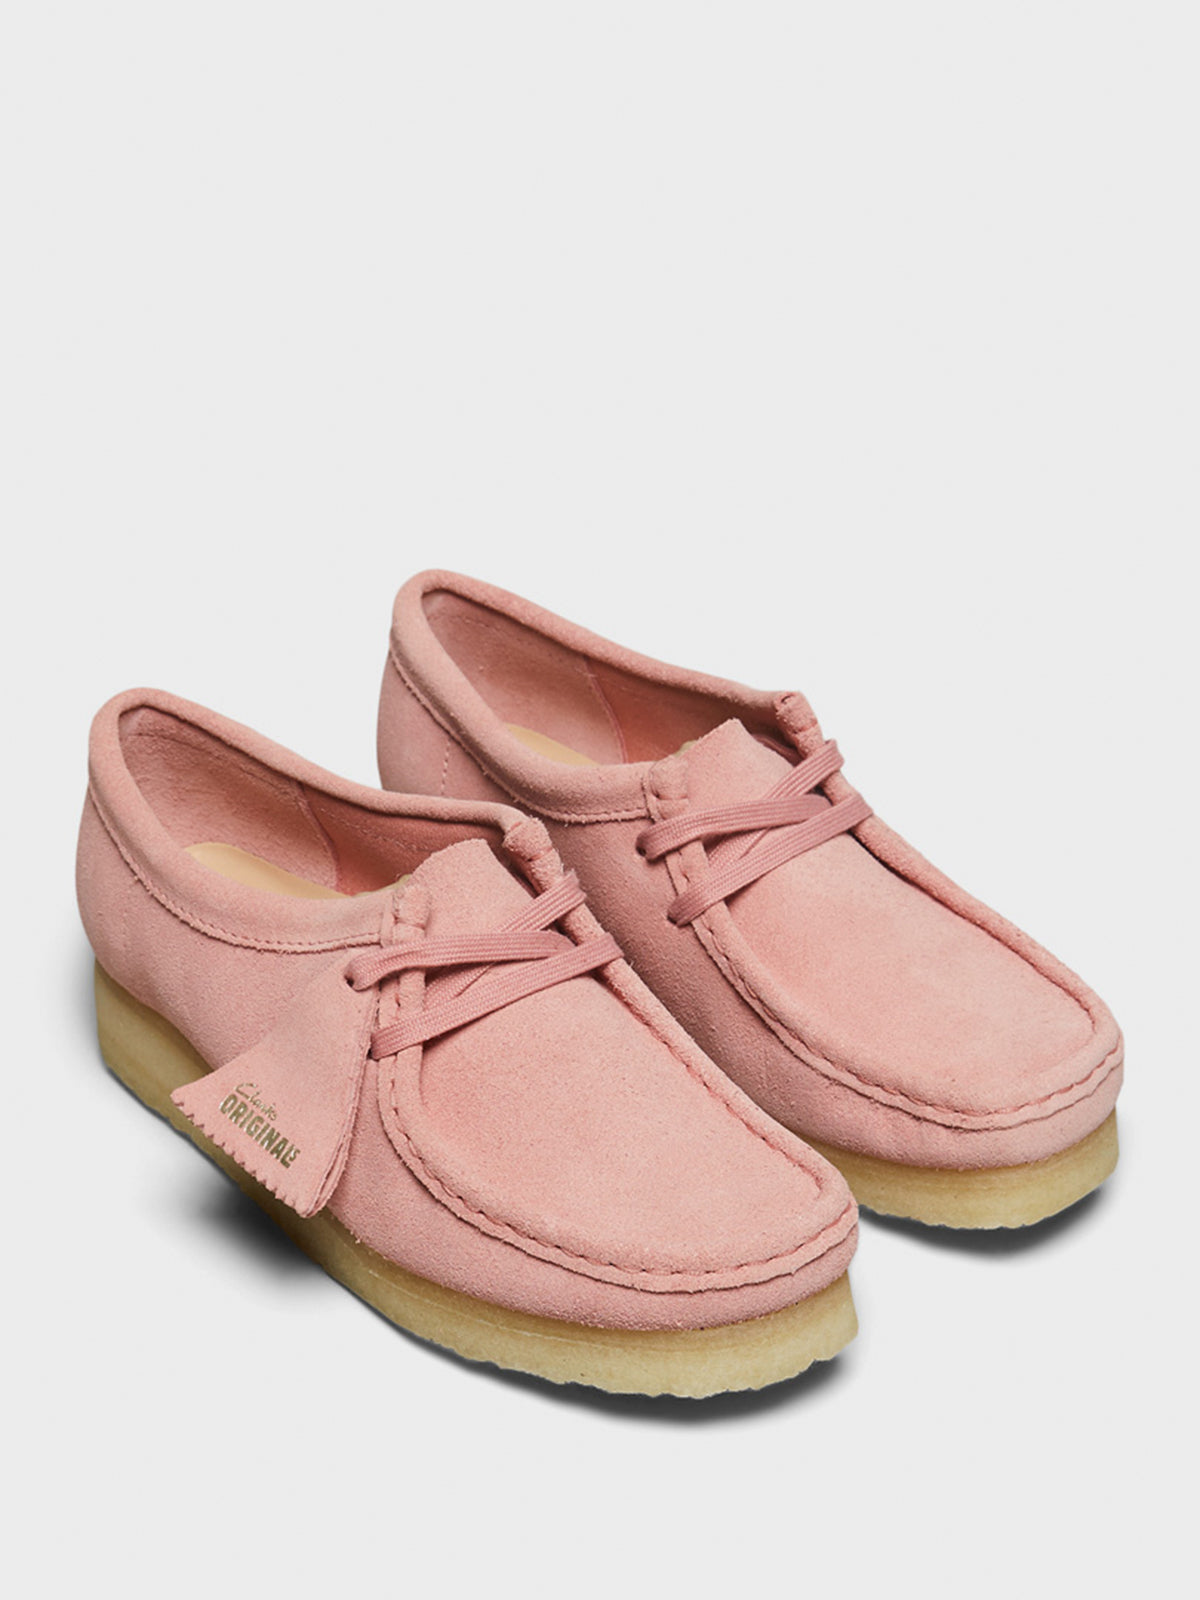 Women's Wallabee Shoes in Blush Pink Suede